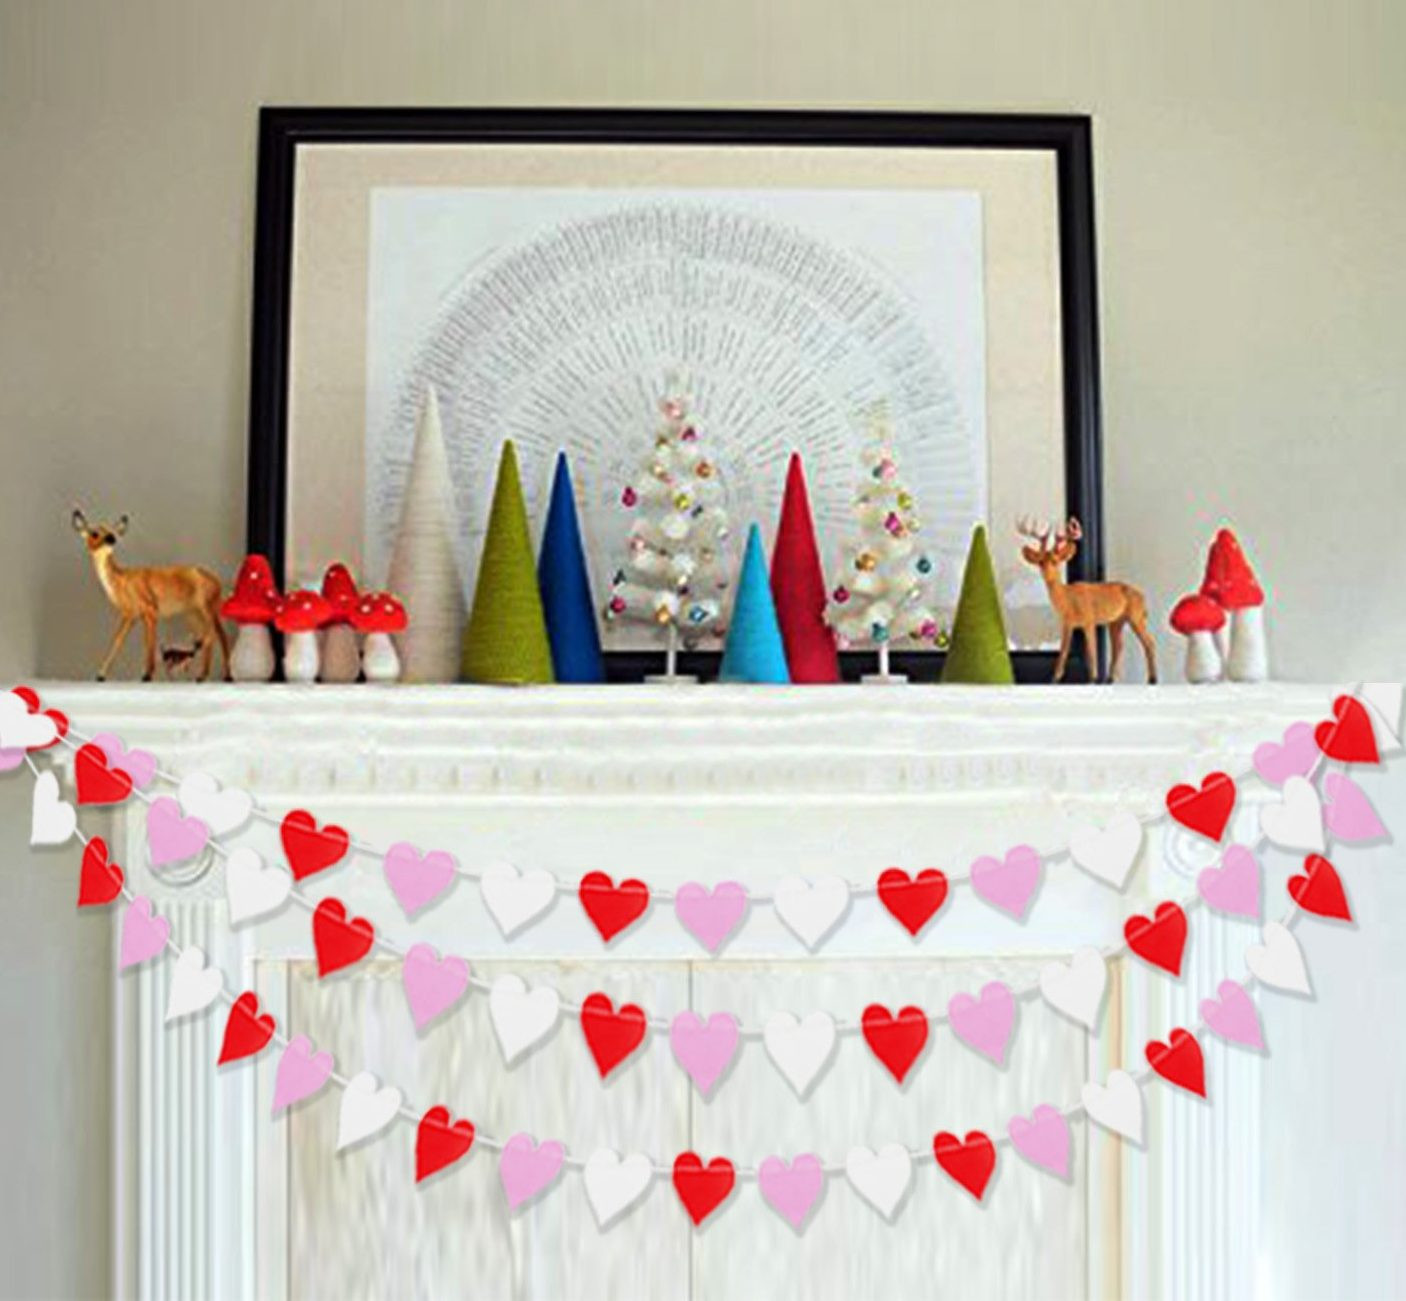 Ideas For Valentines Day 2019
 10 Valentine Decorations & Ideas in 2020 – Cute Heart